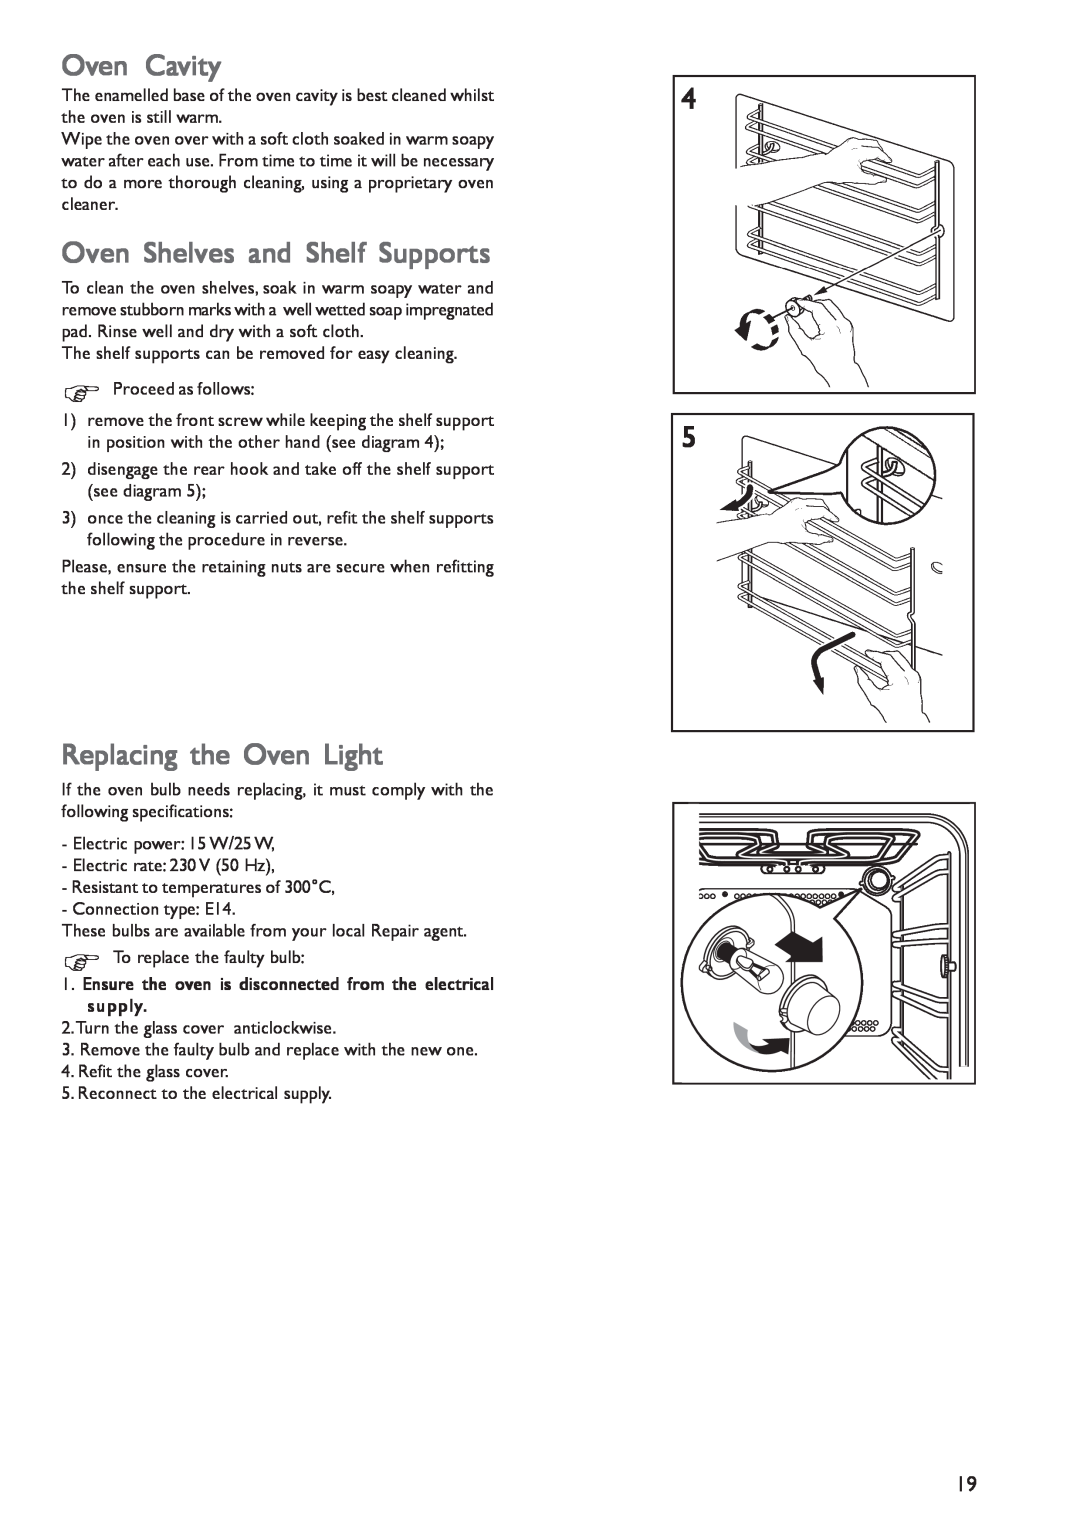 John Lewis JLBIOS601 instruction manual Oven Cavity, Oven Shelves and Shelf Supports, Replacing the Oven Light 